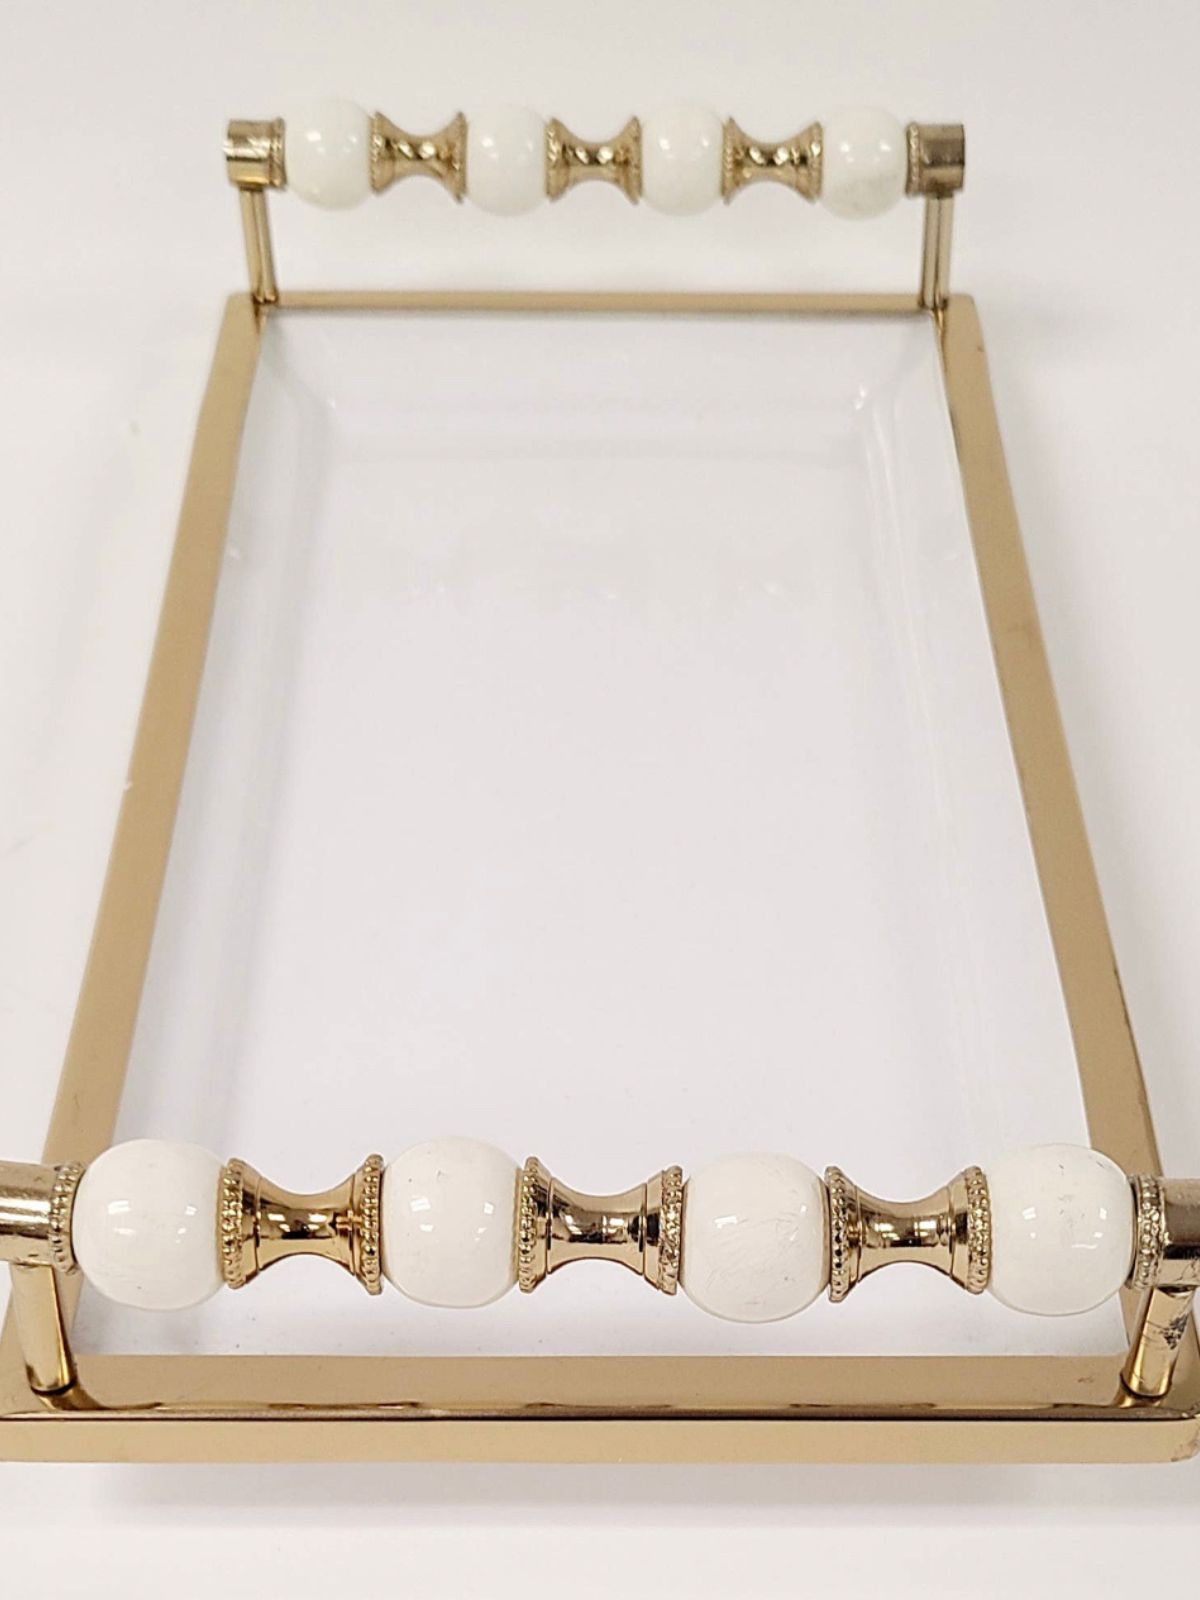 White and Gold Rectangular Ceramic Decorative Tray with Beaded Handles, 14L x 7W. 